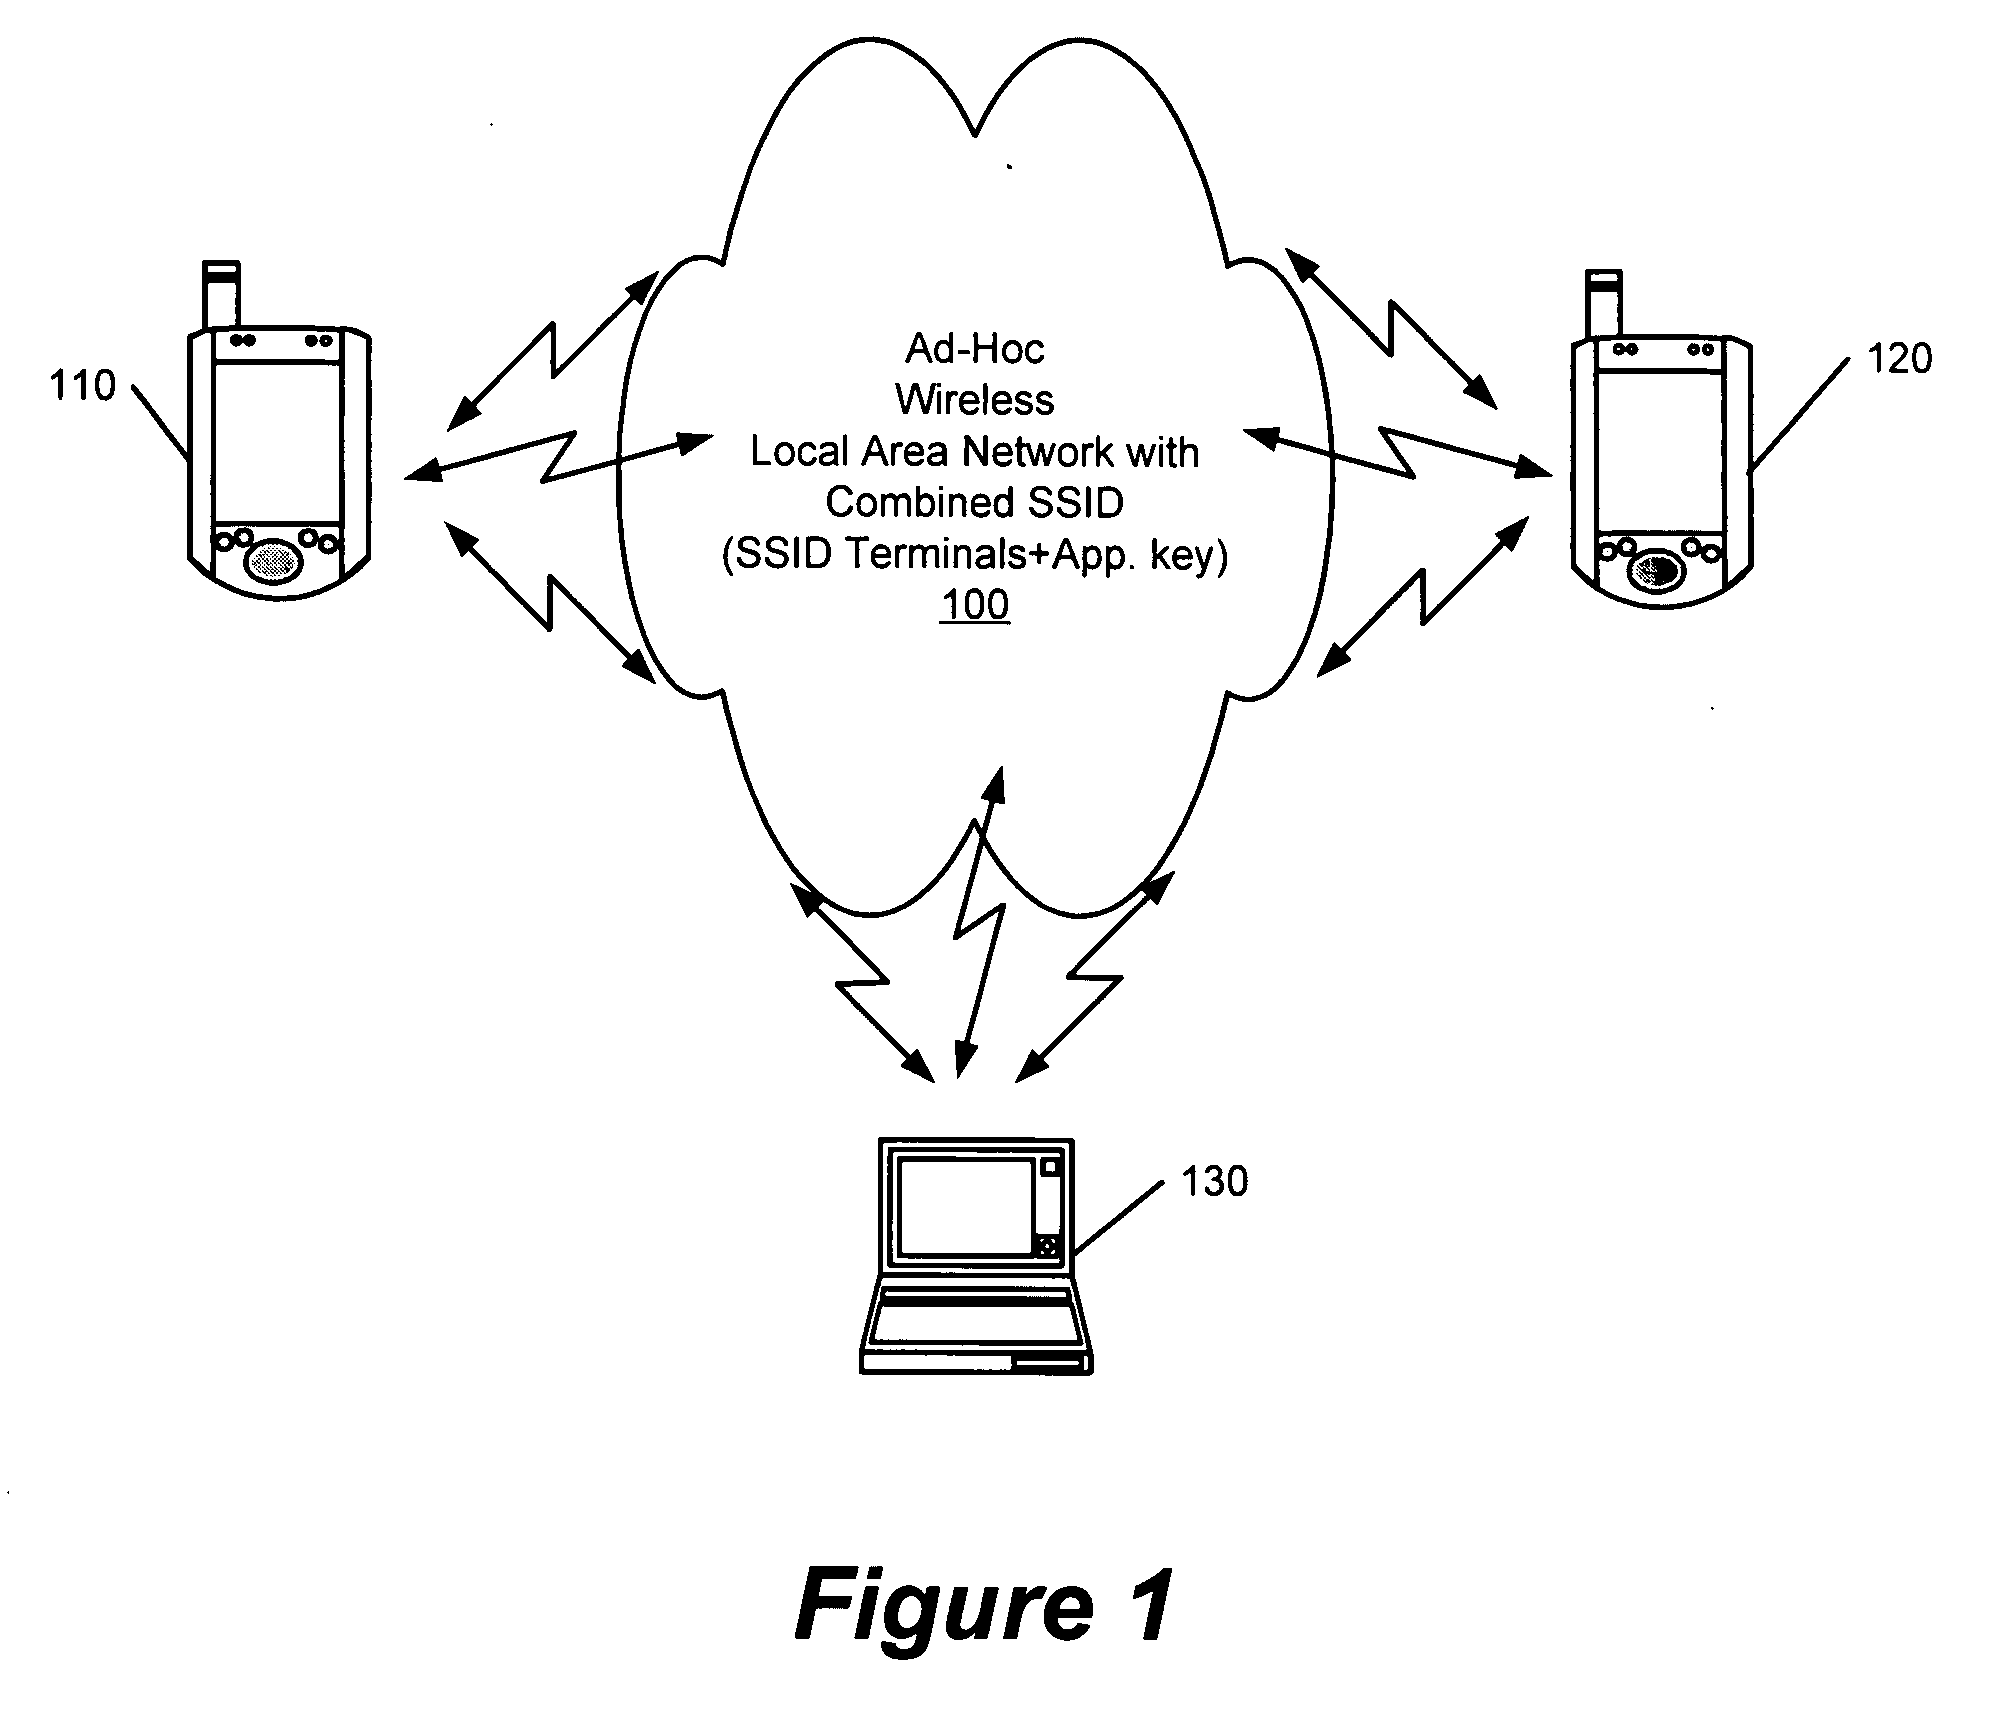 Operating ad-hoc wireless local area networks using network identifiers and application keys